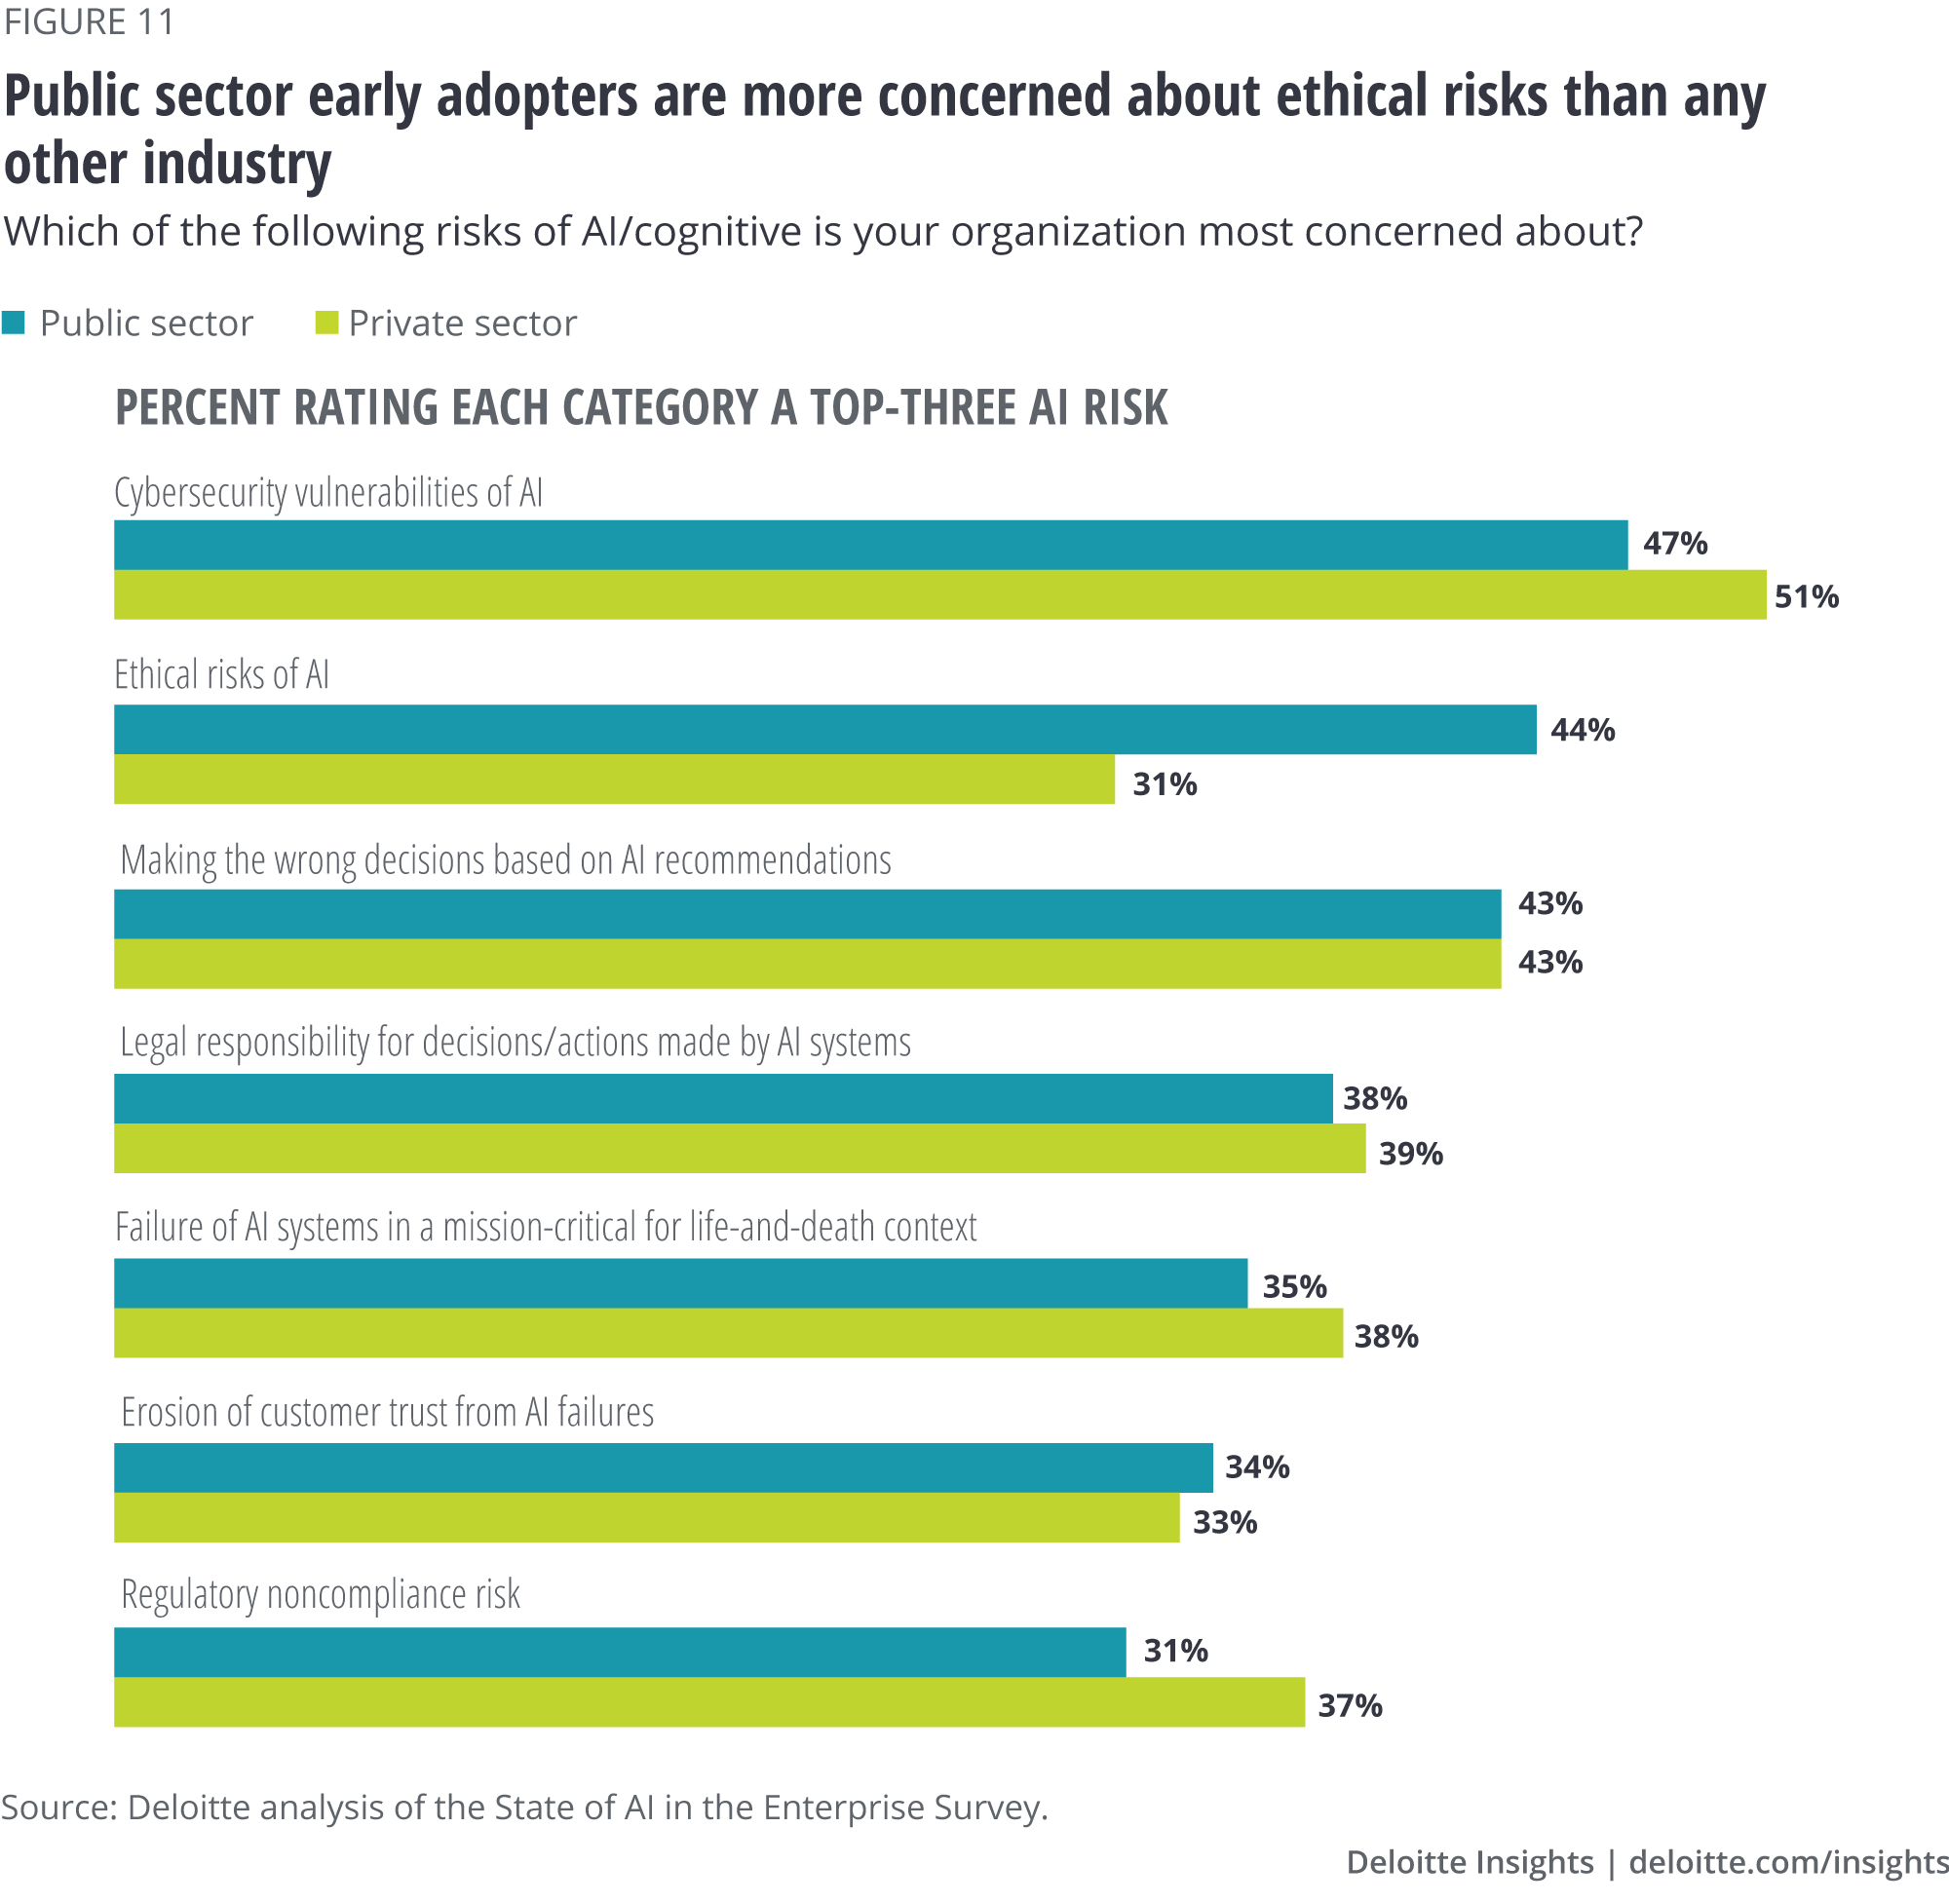 Public sector early adopters are more concerned about ethical risks than any other industry